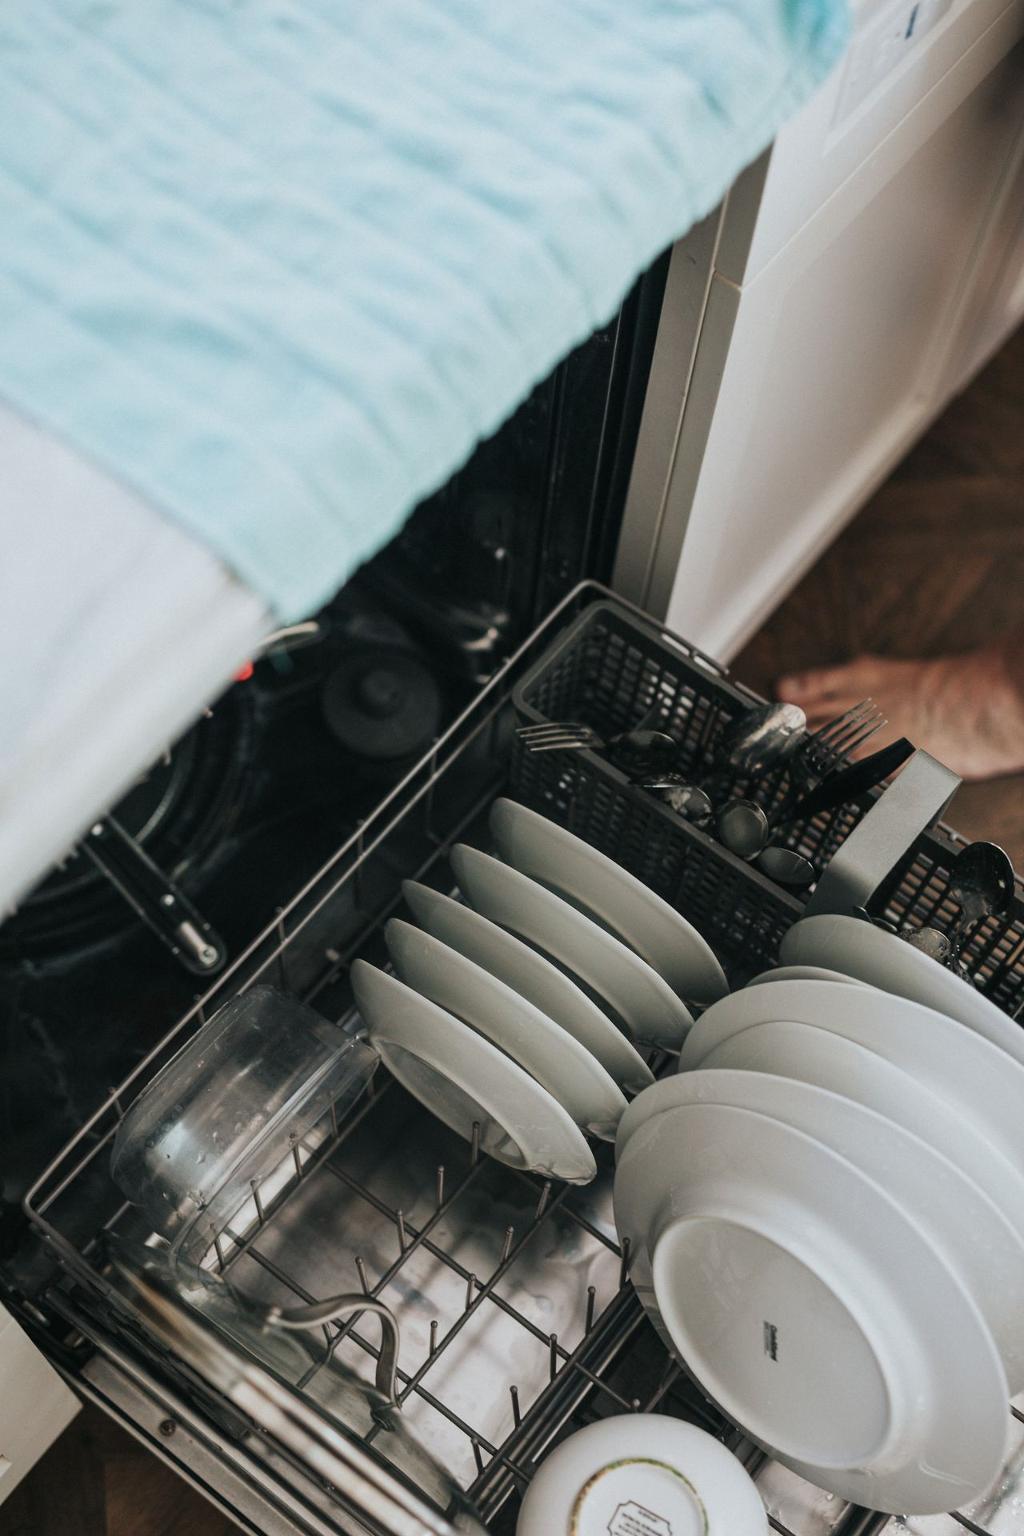 Using a dishwasher deep cleaner once a month will keep it smell free and make it shine.